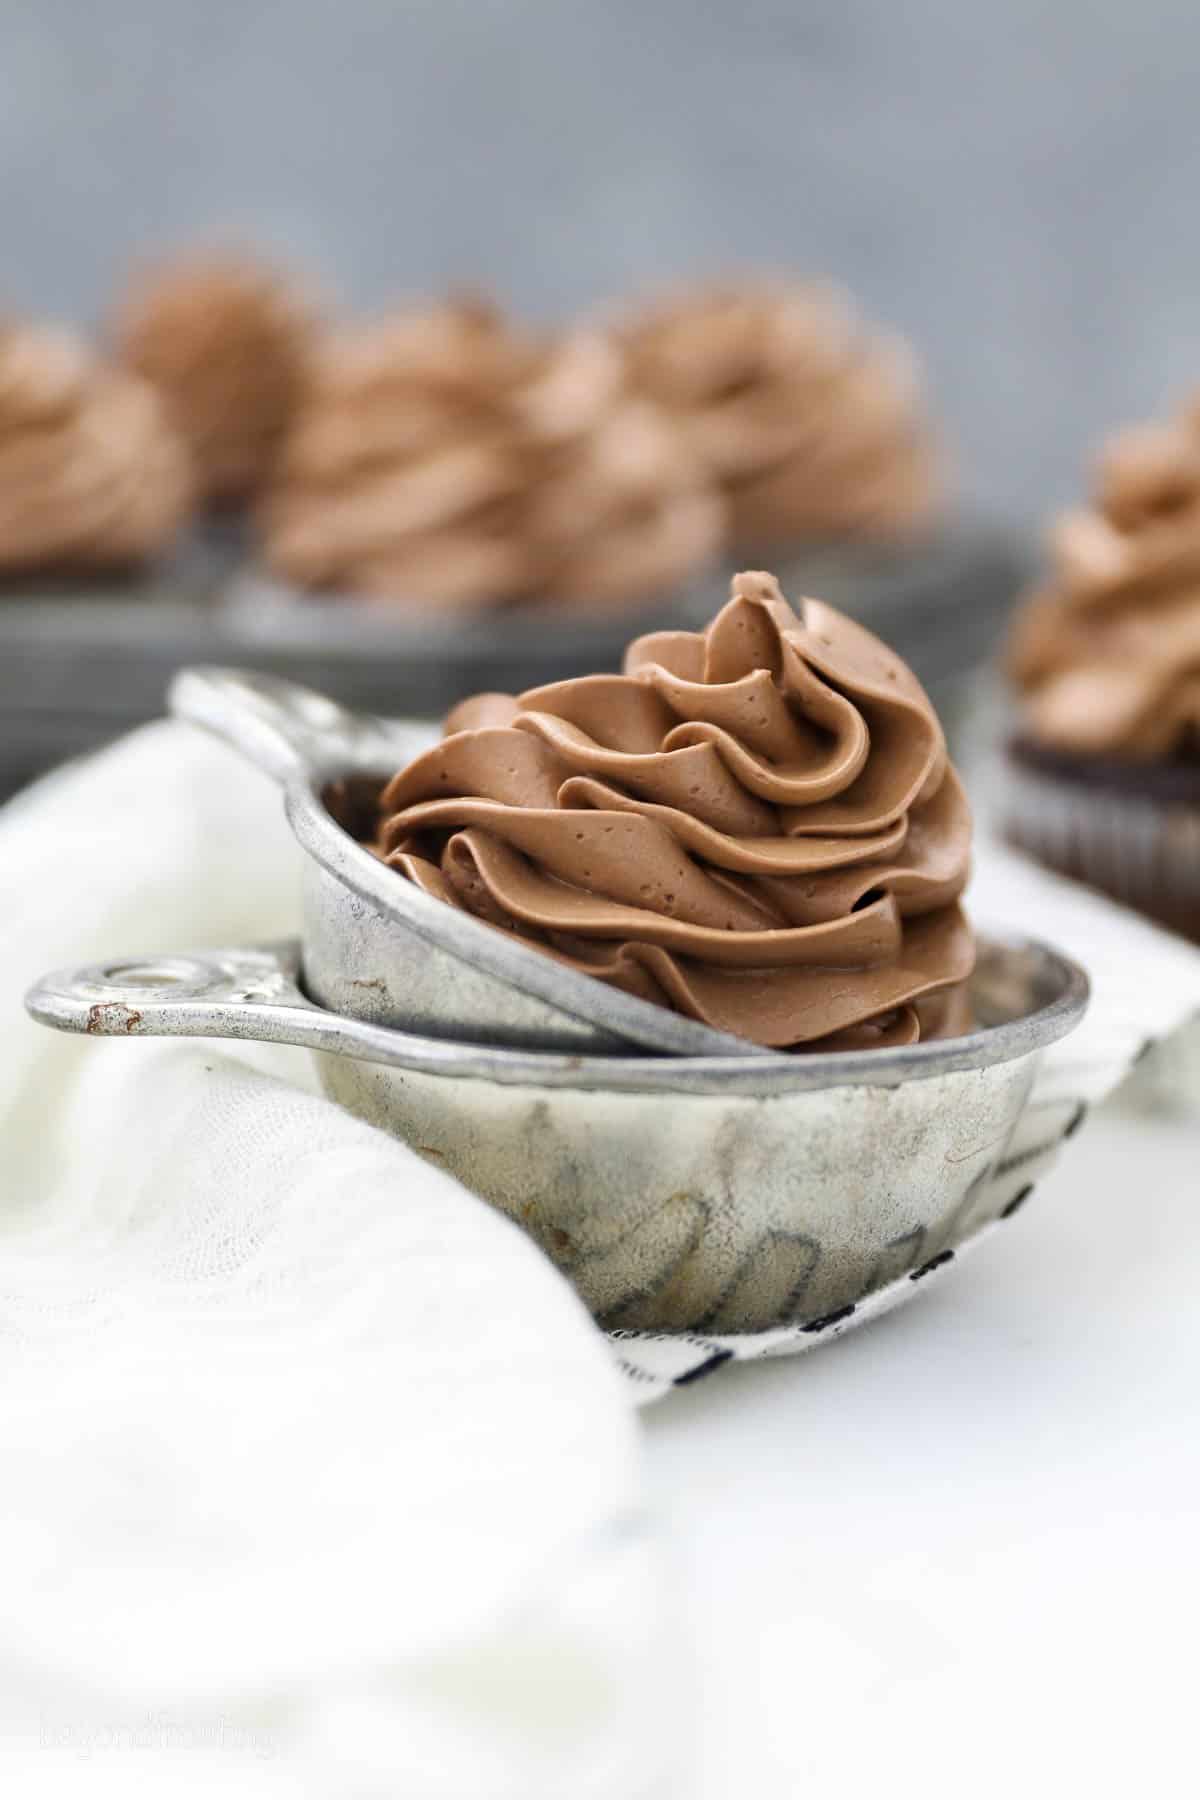 Chocolate Swiss meringue buttercream swirled in a silver serving dish with a pan of cupcakes in background.